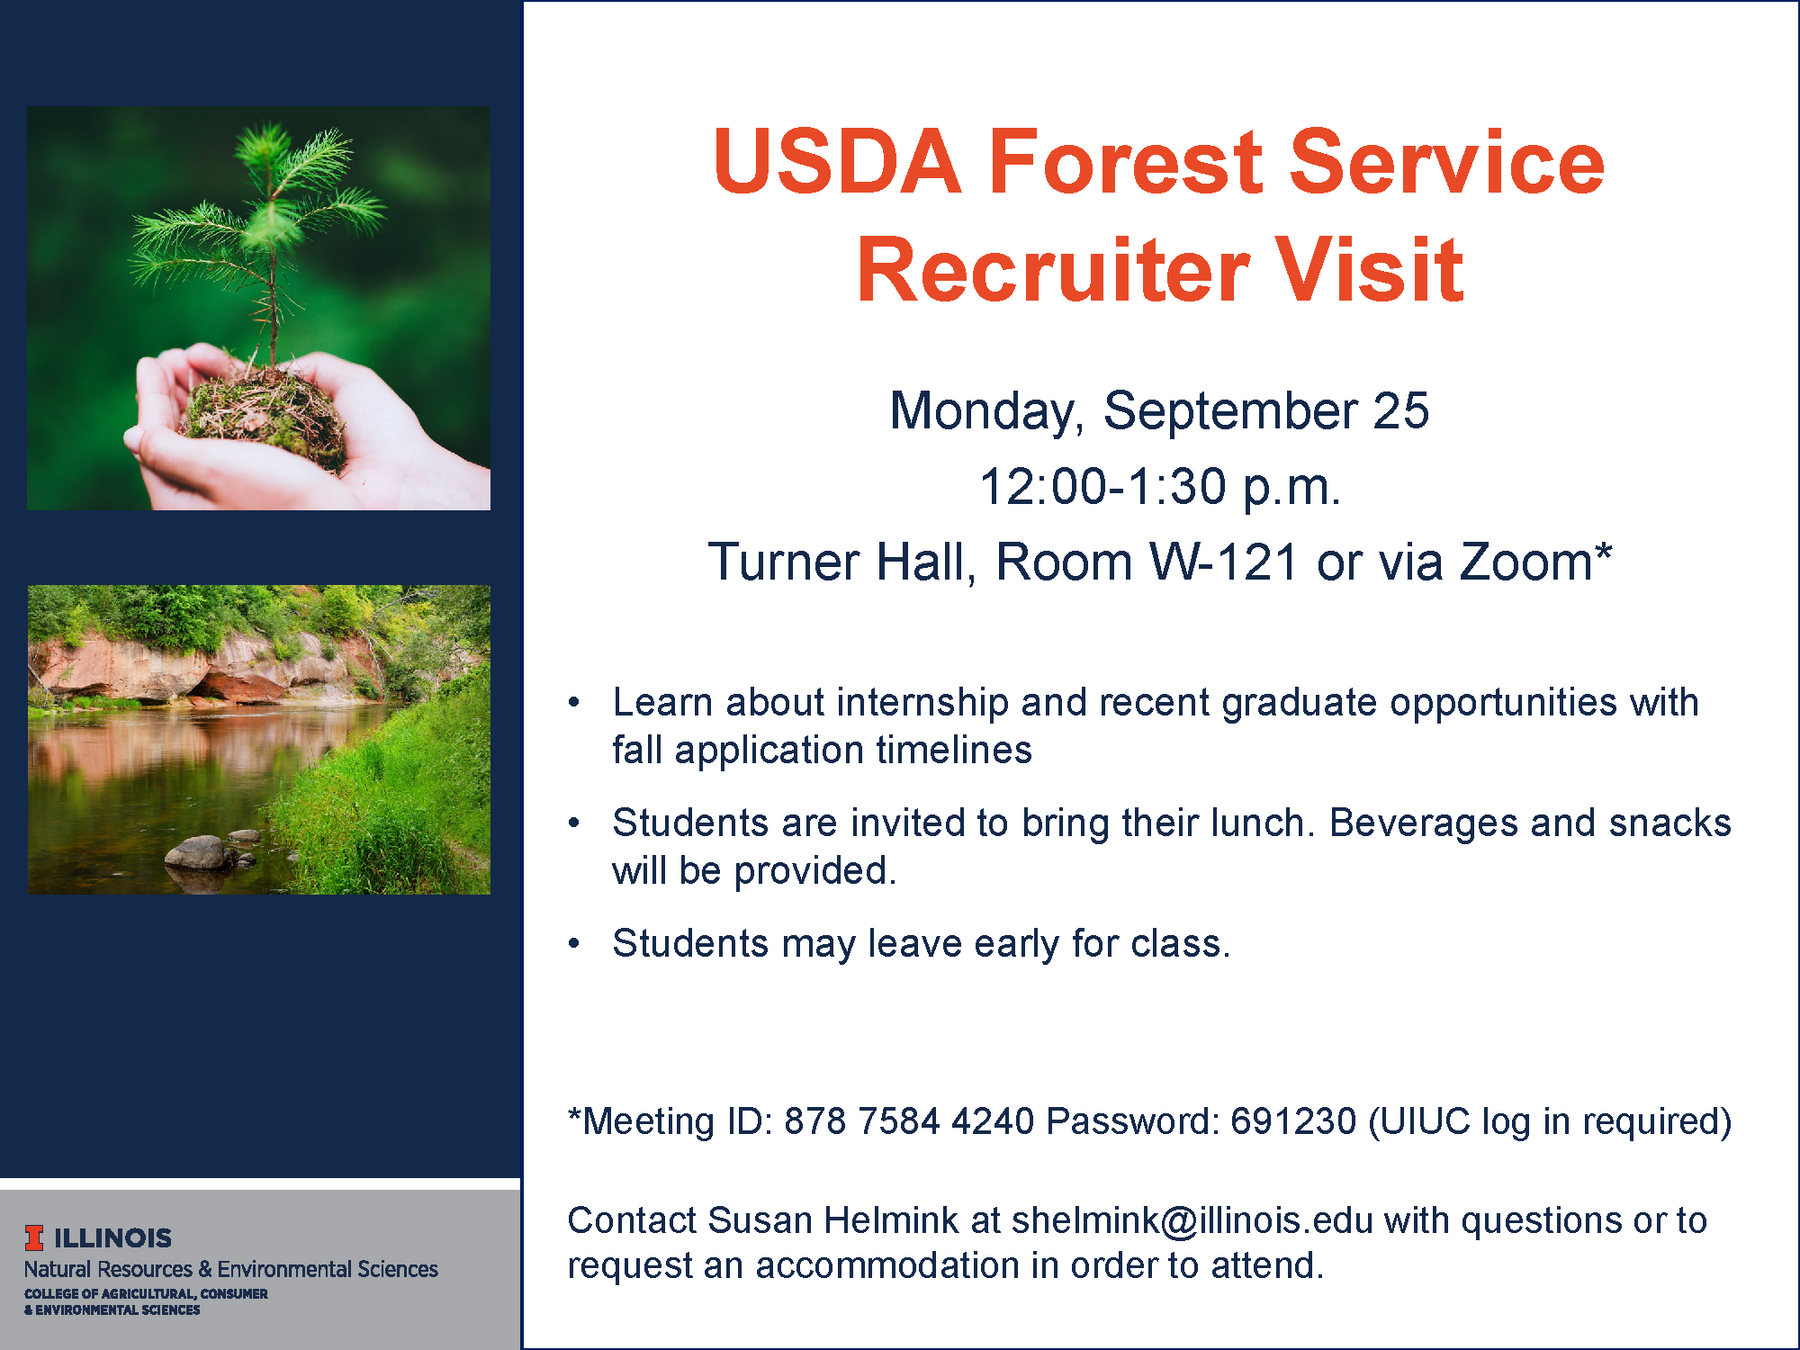 Flyer with details about Forest Service event